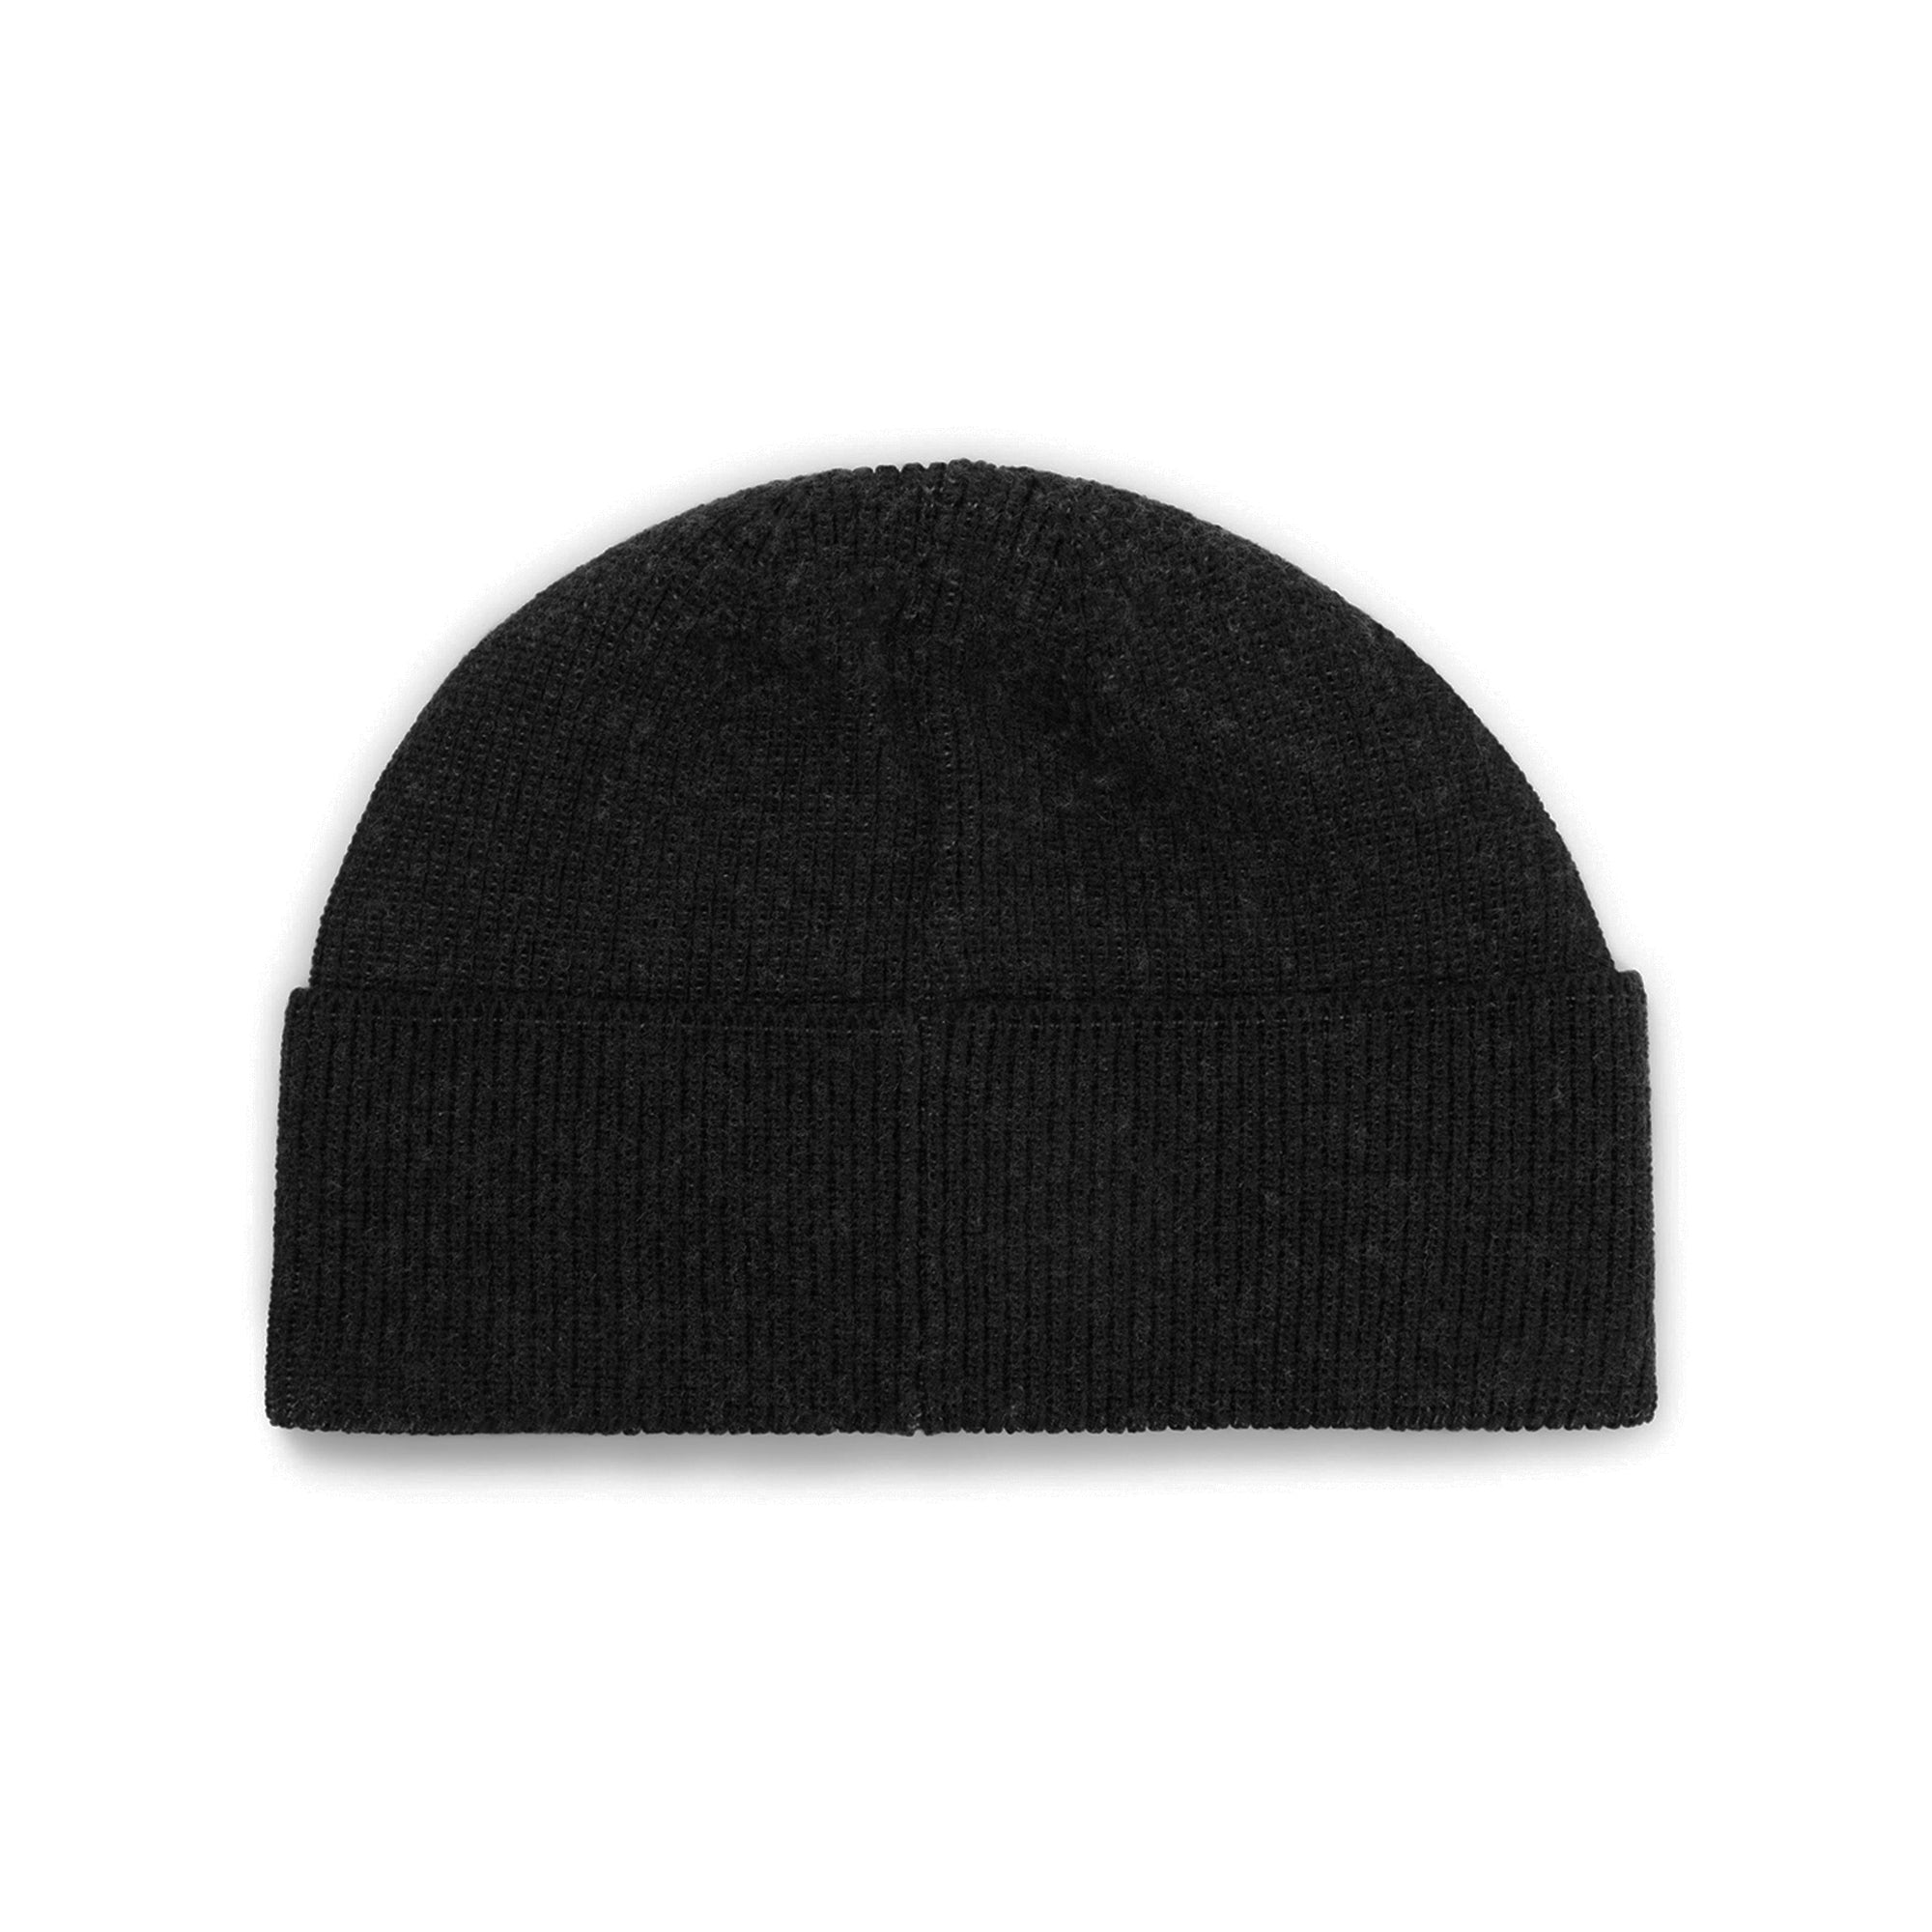 BOSS Lamico Knitted Beanie Hat 50495296 Black 001 | Function18